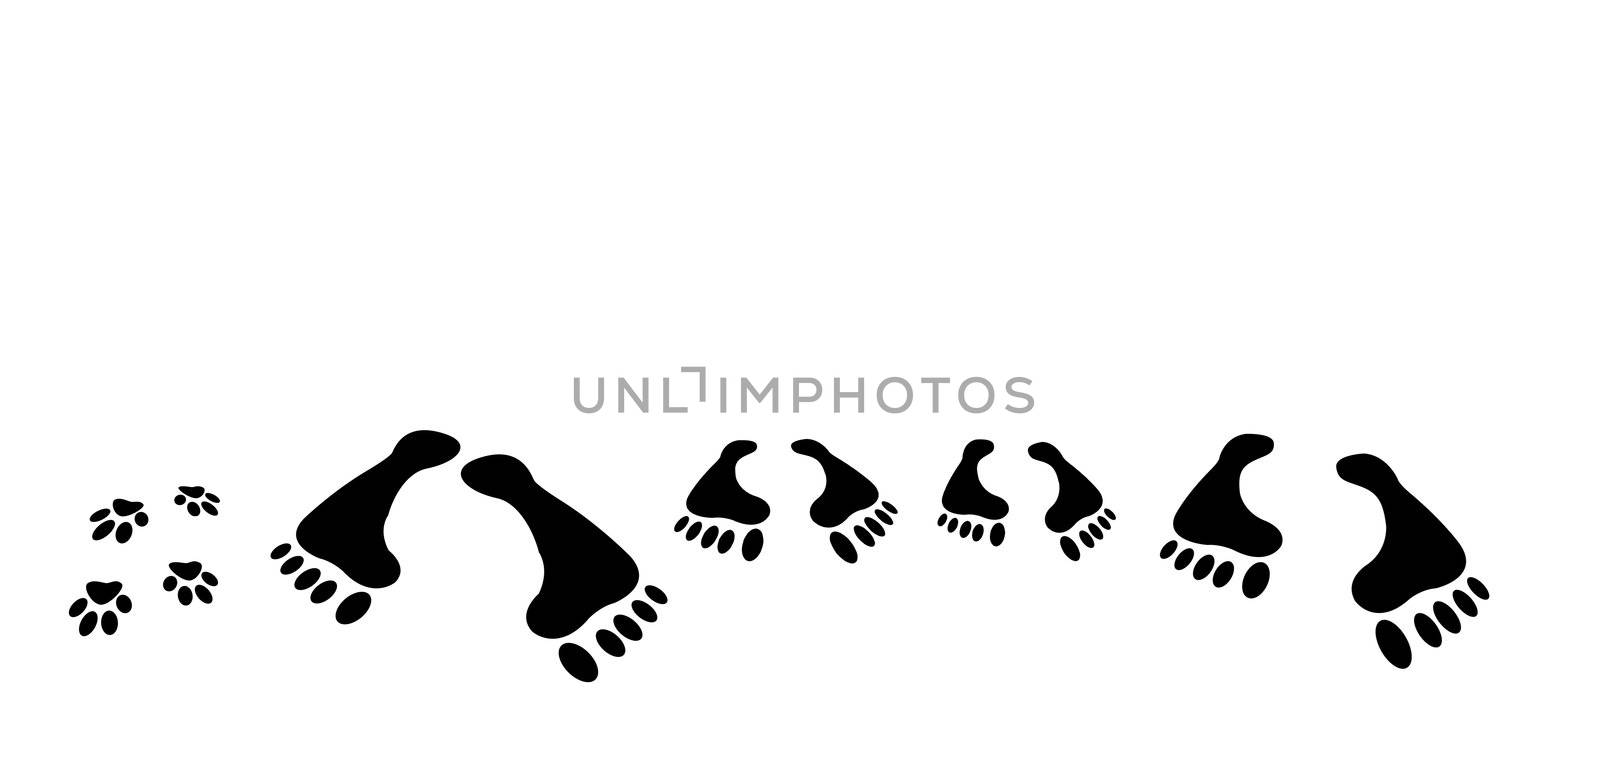 traces of family. It is isolated on a white background ������������ the image of traces from legs of the person